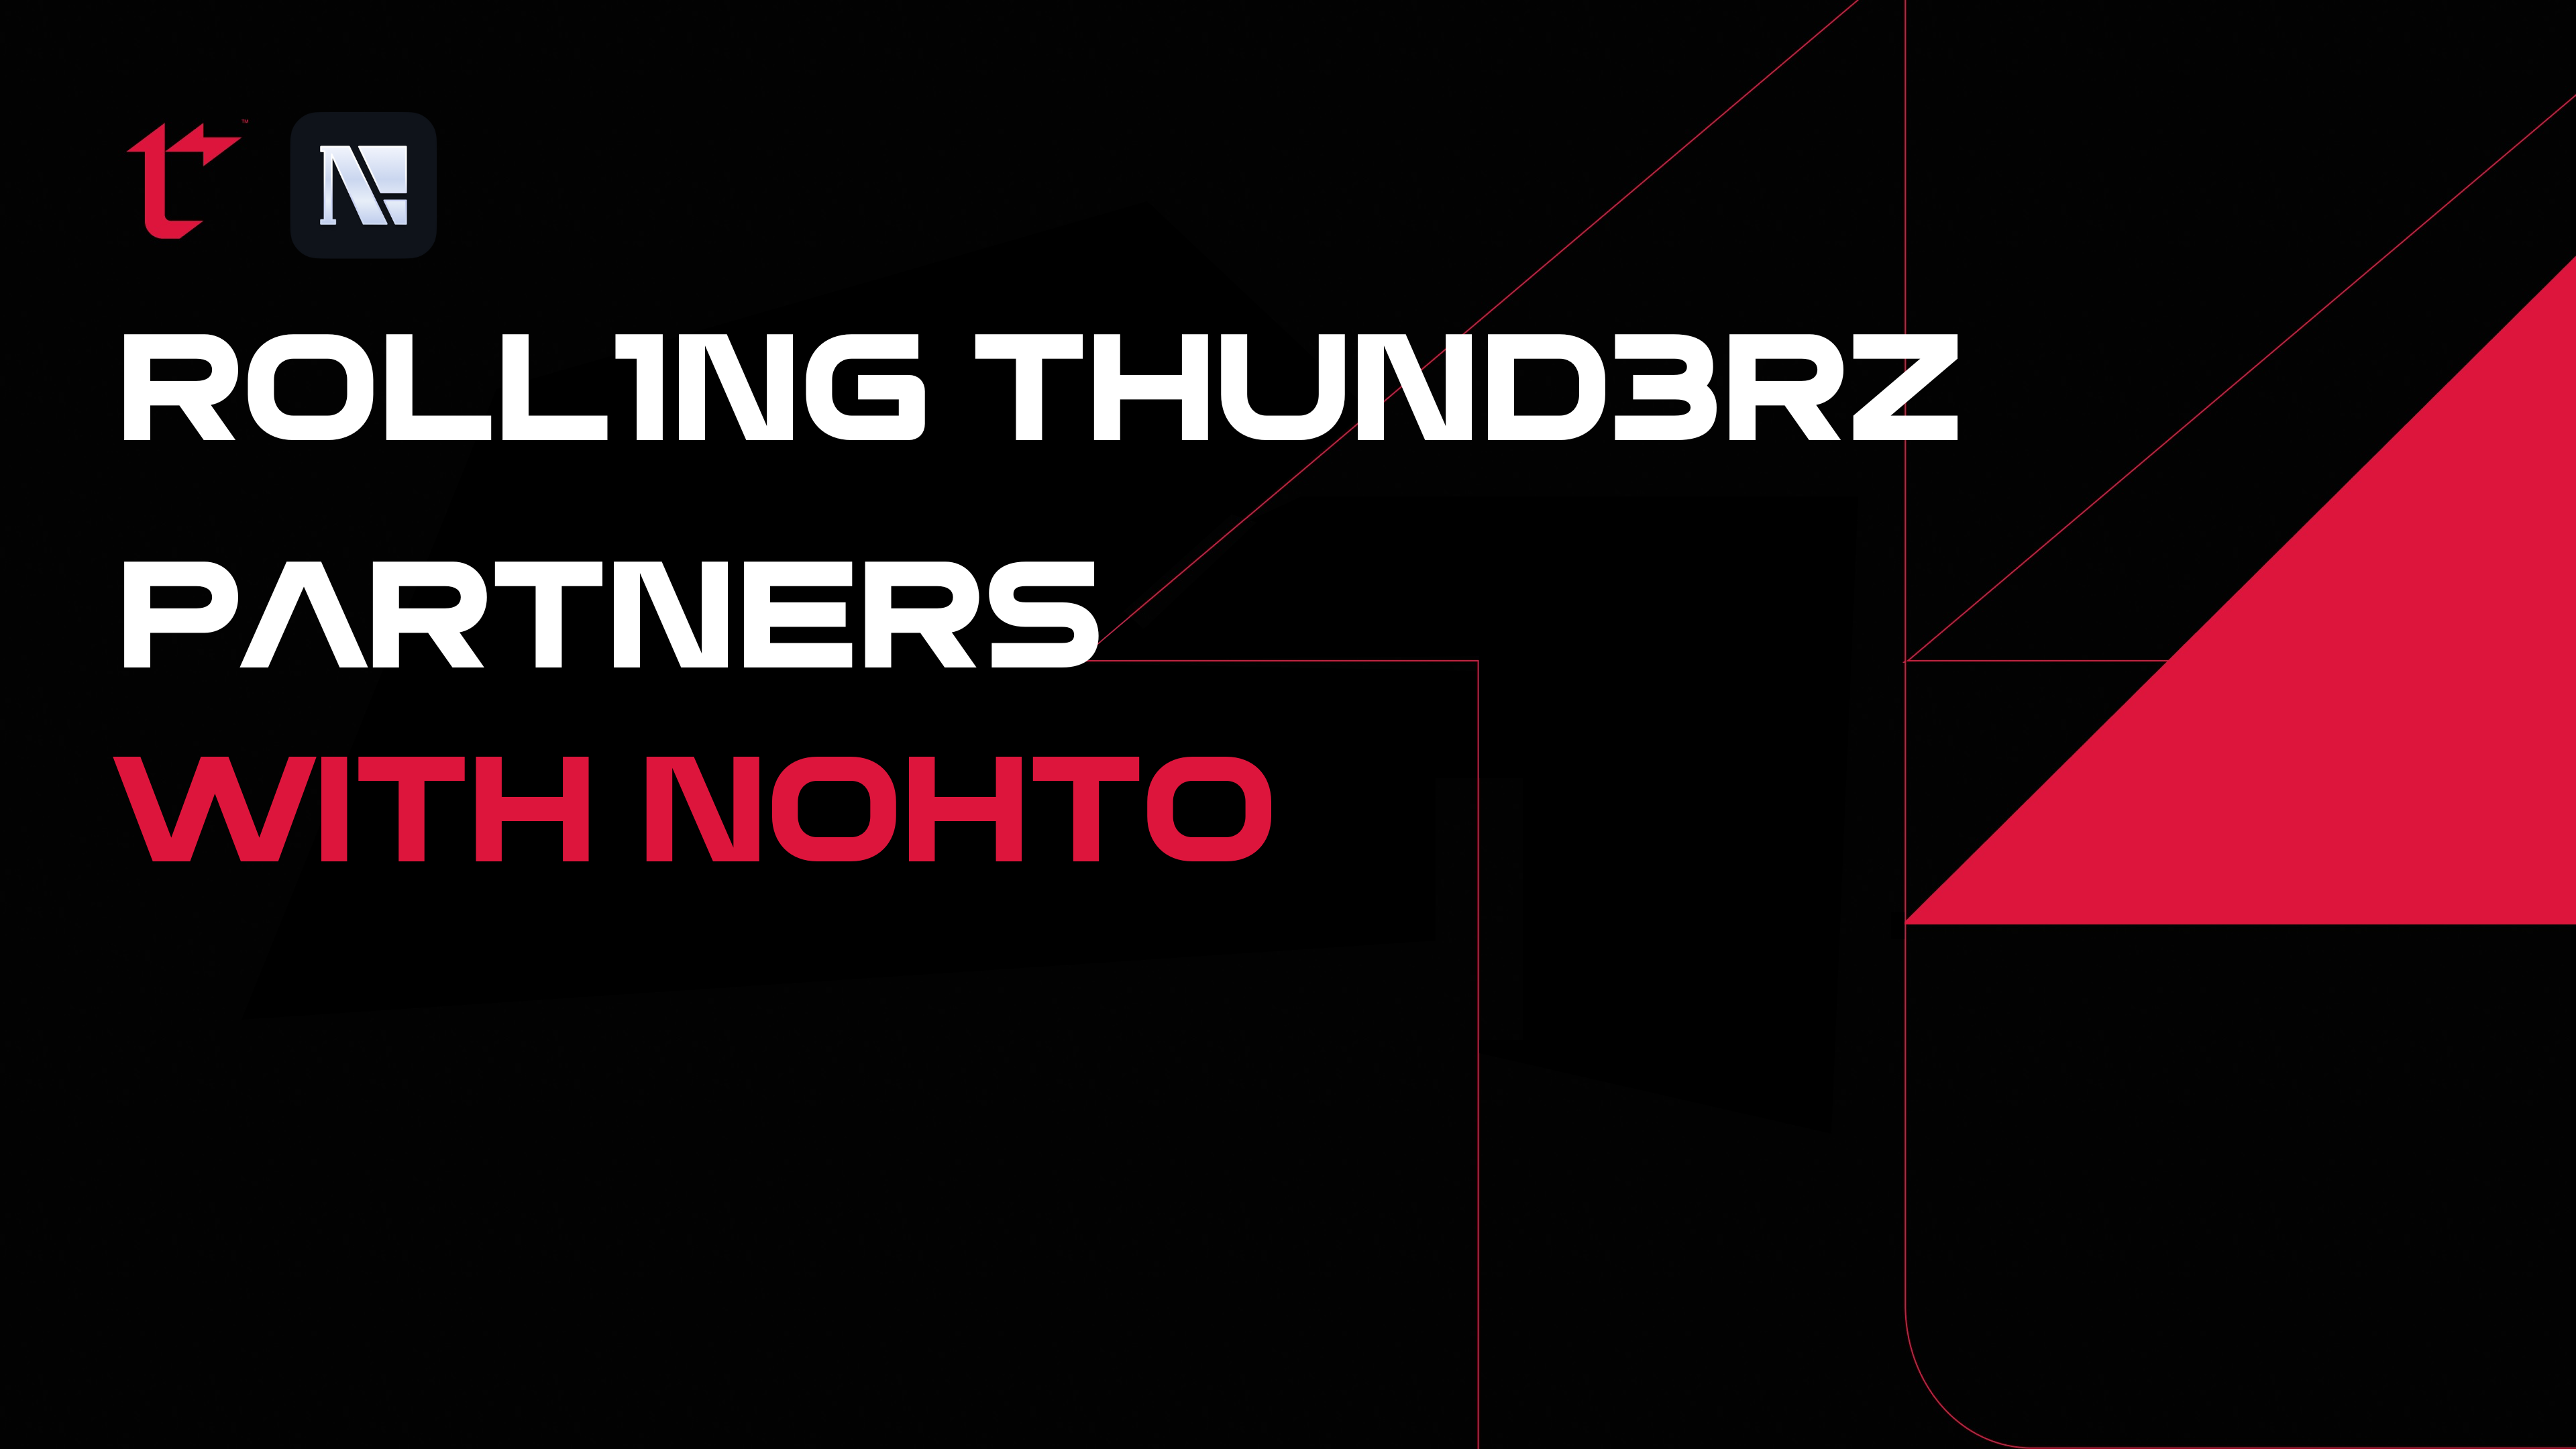 Roll1ng Thund3rz forges groundbreaking partnership with Nohto